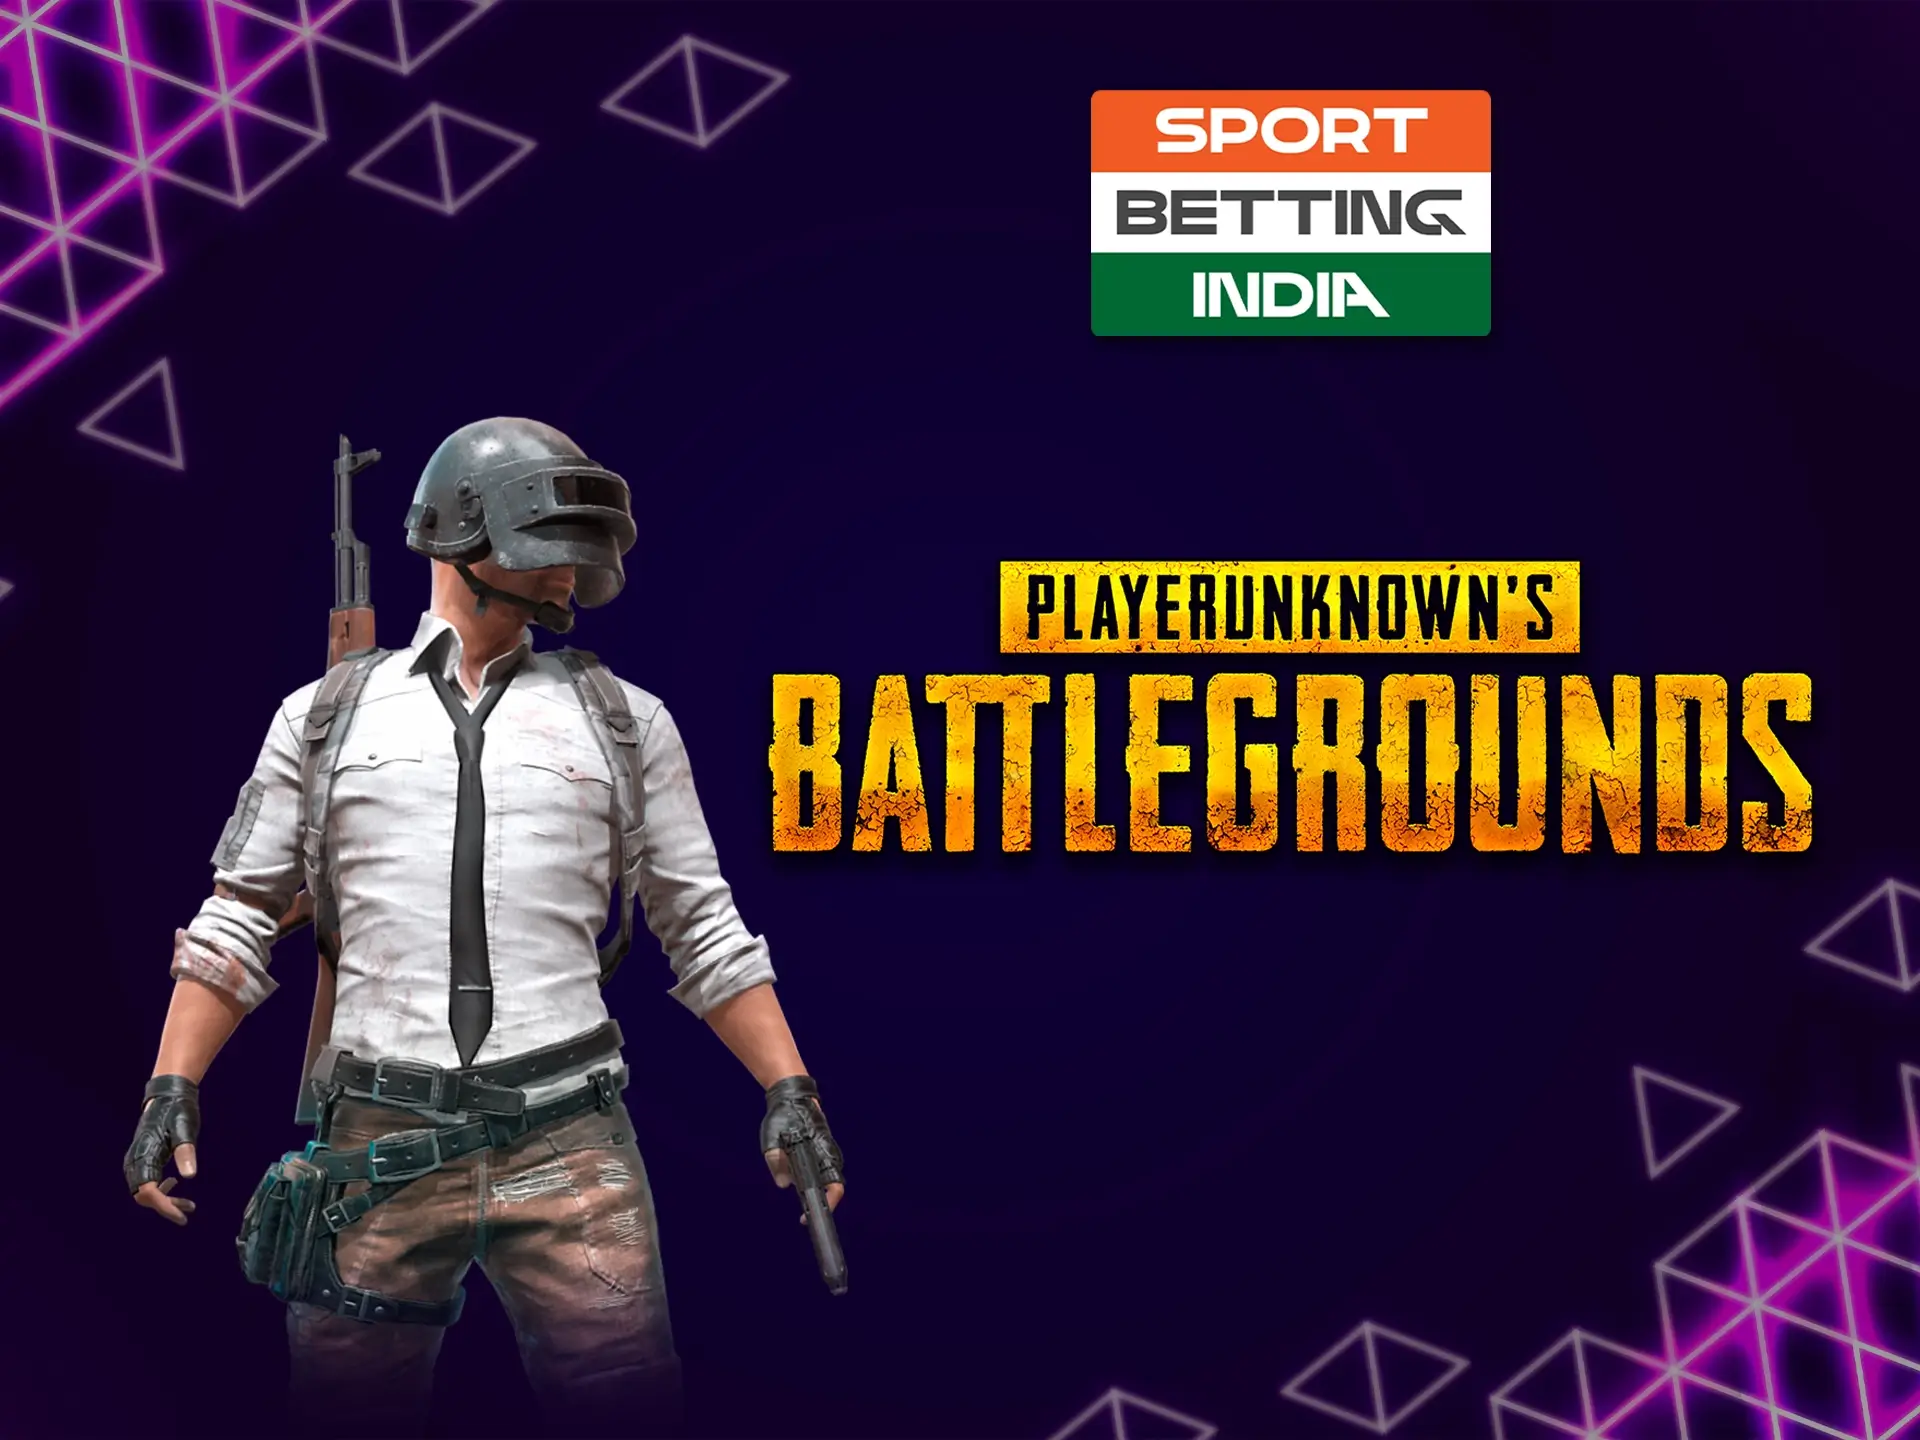 Pay attention to your favourite player's level of play when betting on PUBG.